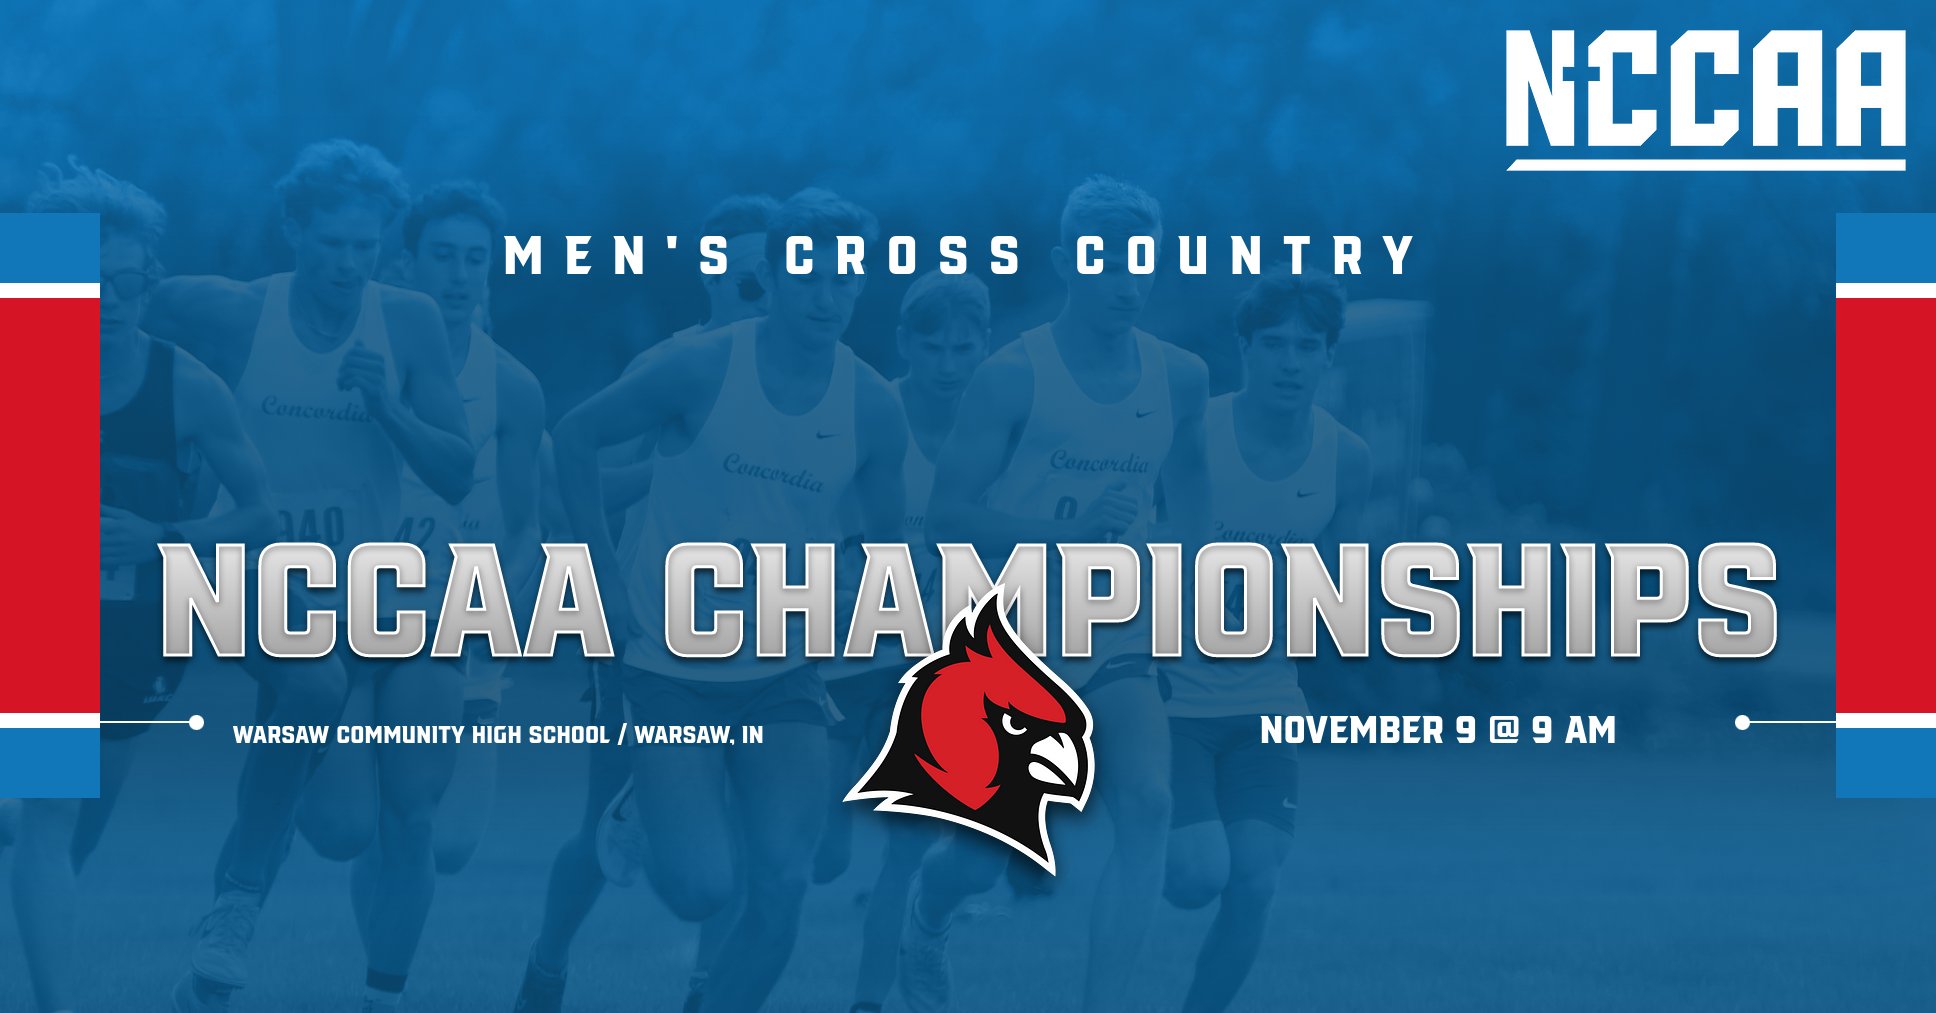 NCCAA PREVIEW: Men's Cross Country set to compete at NCCAA Championships